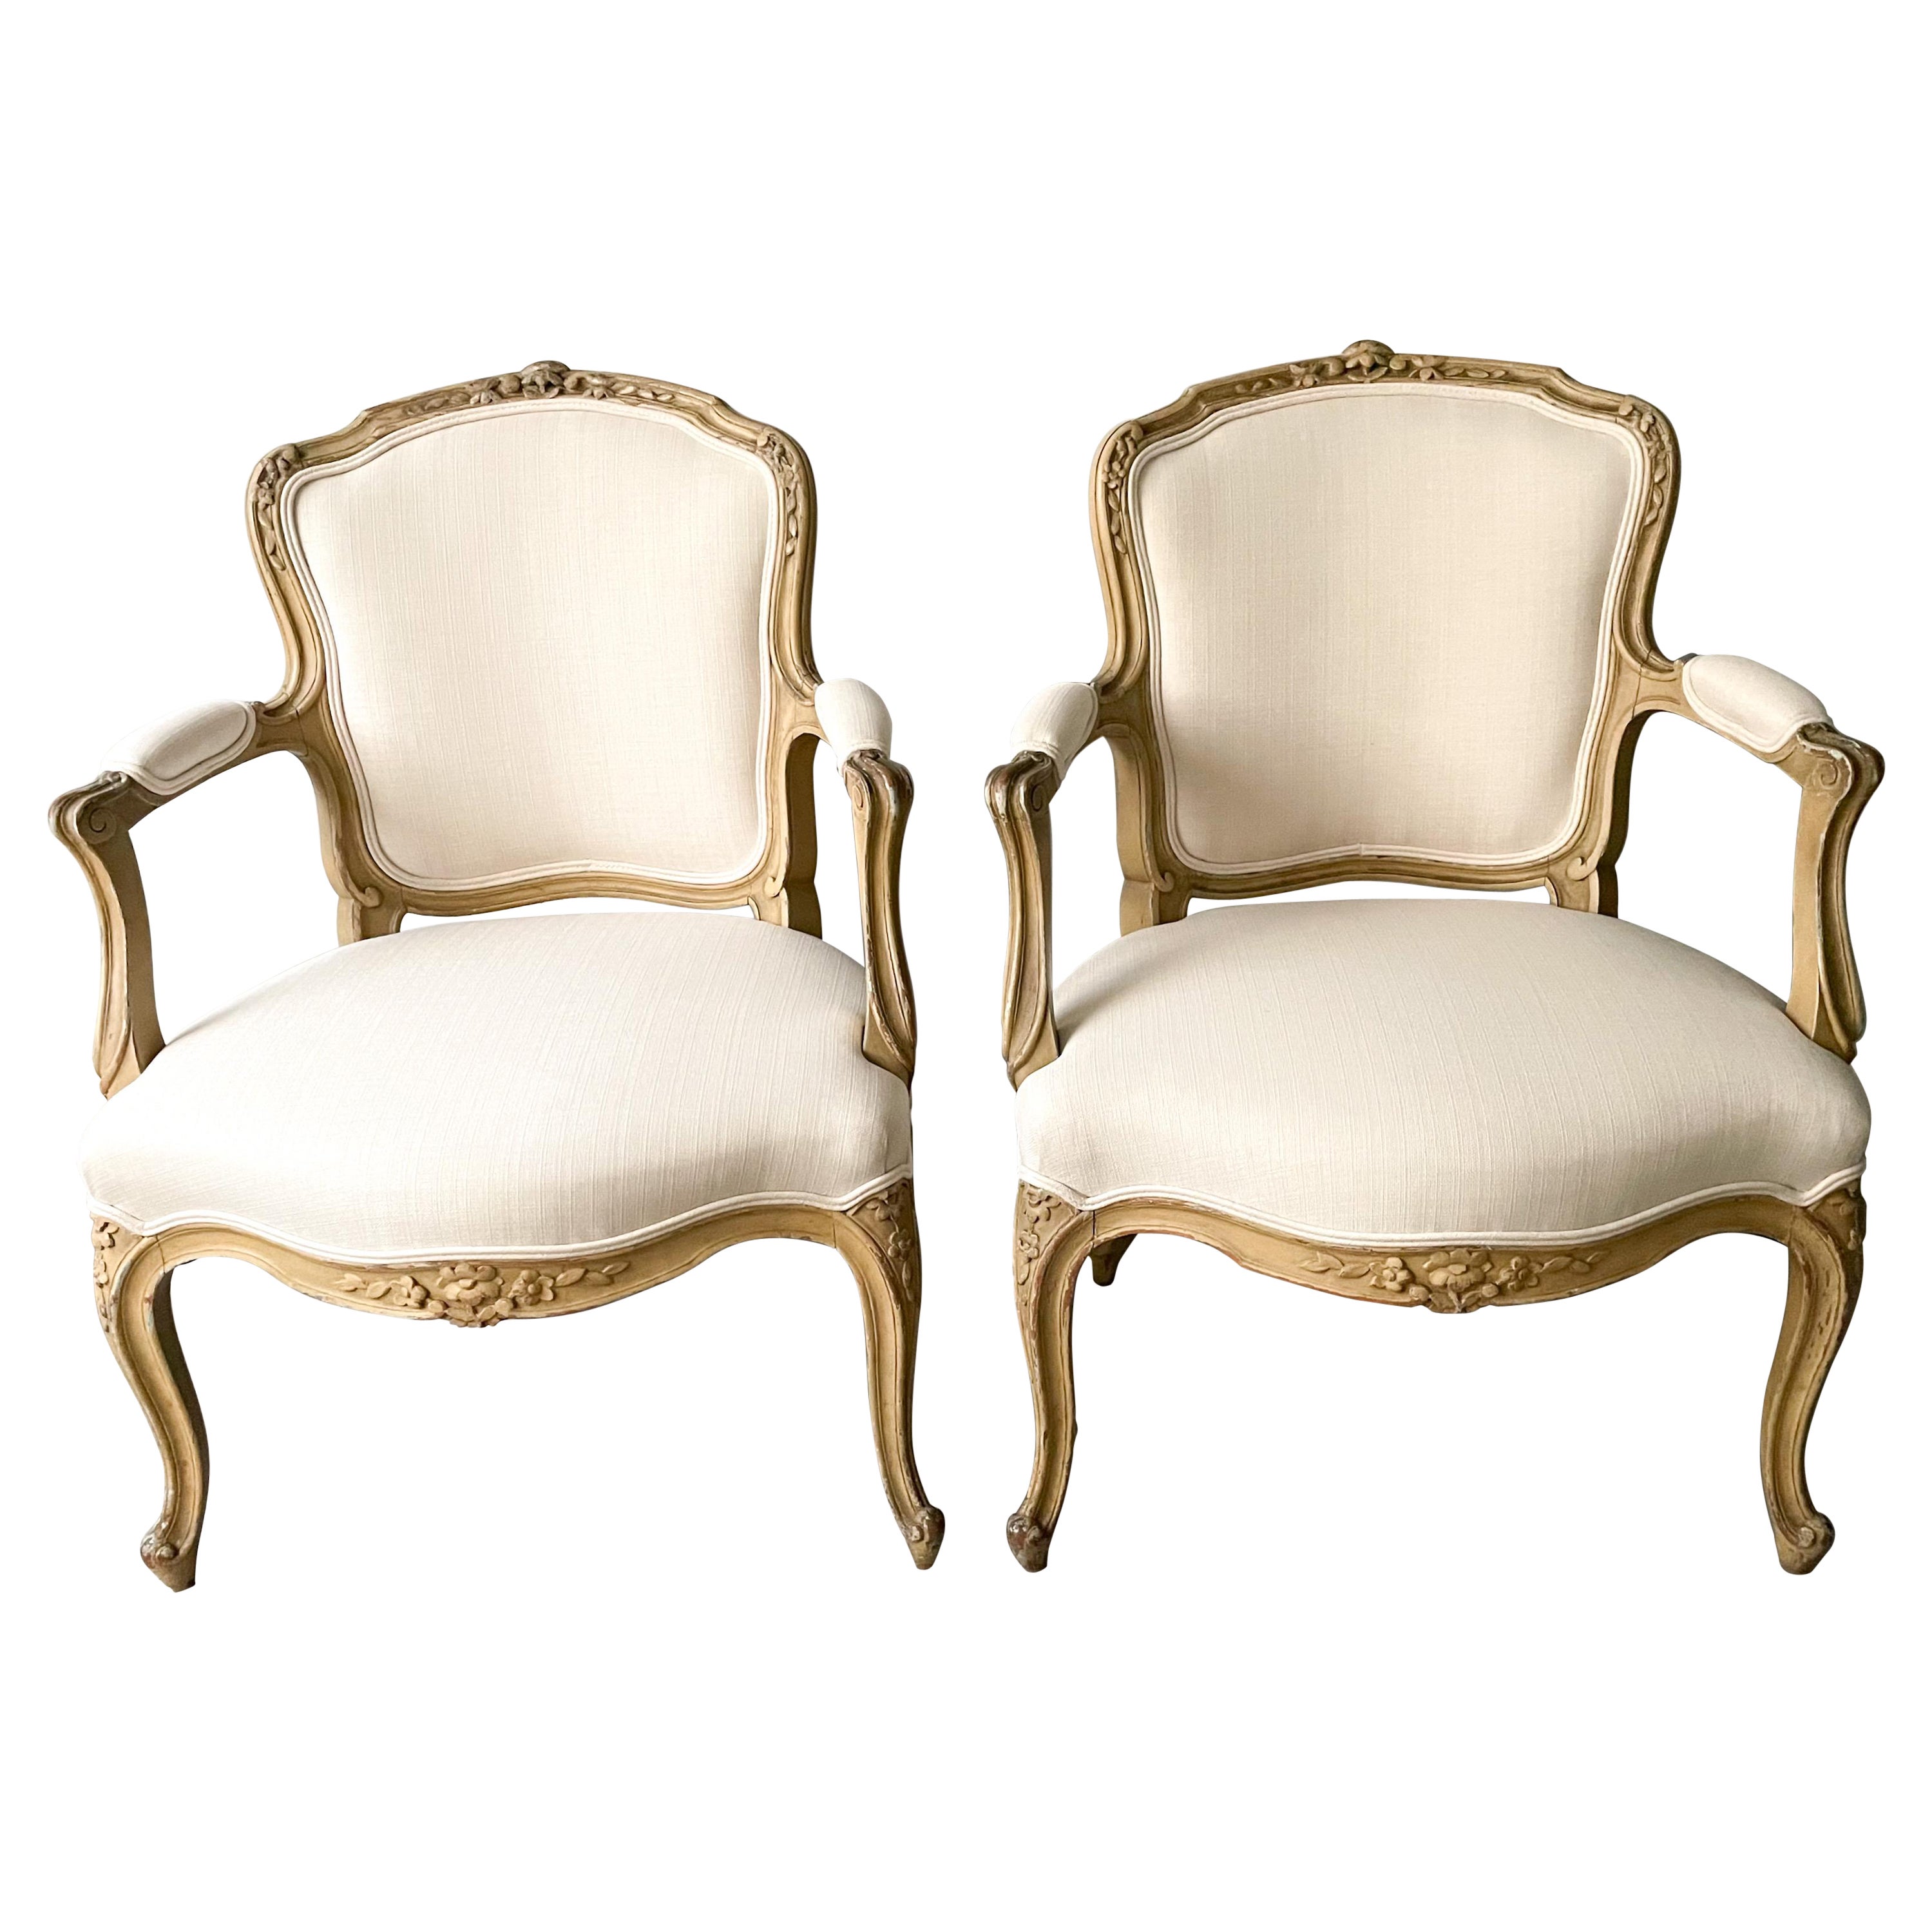 Pair of Petite French Louis XVI-Style Chairs For Sale